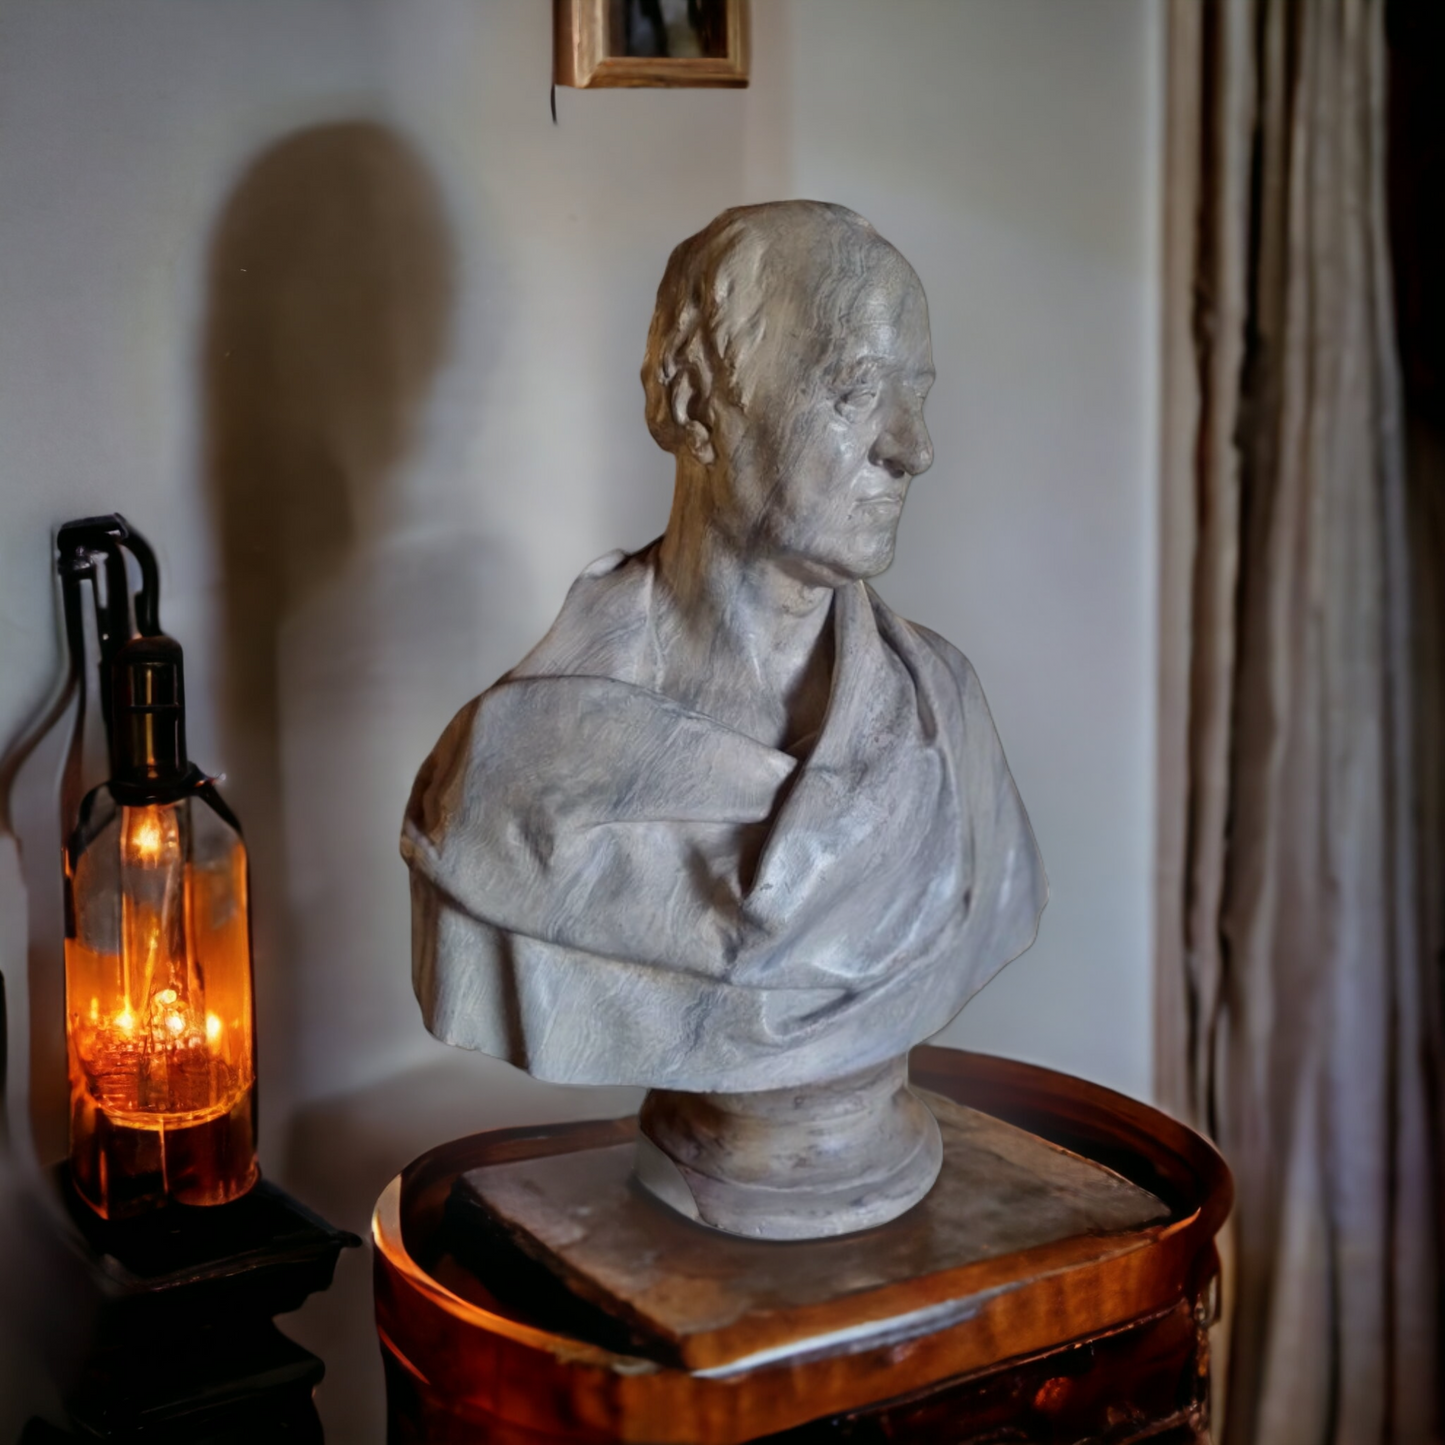 Robert William Sievier (1794-1865) - An Early 19th Century English Antique Faux Marble, Life-Size, Bust of a Gentleman in the Classical Manner